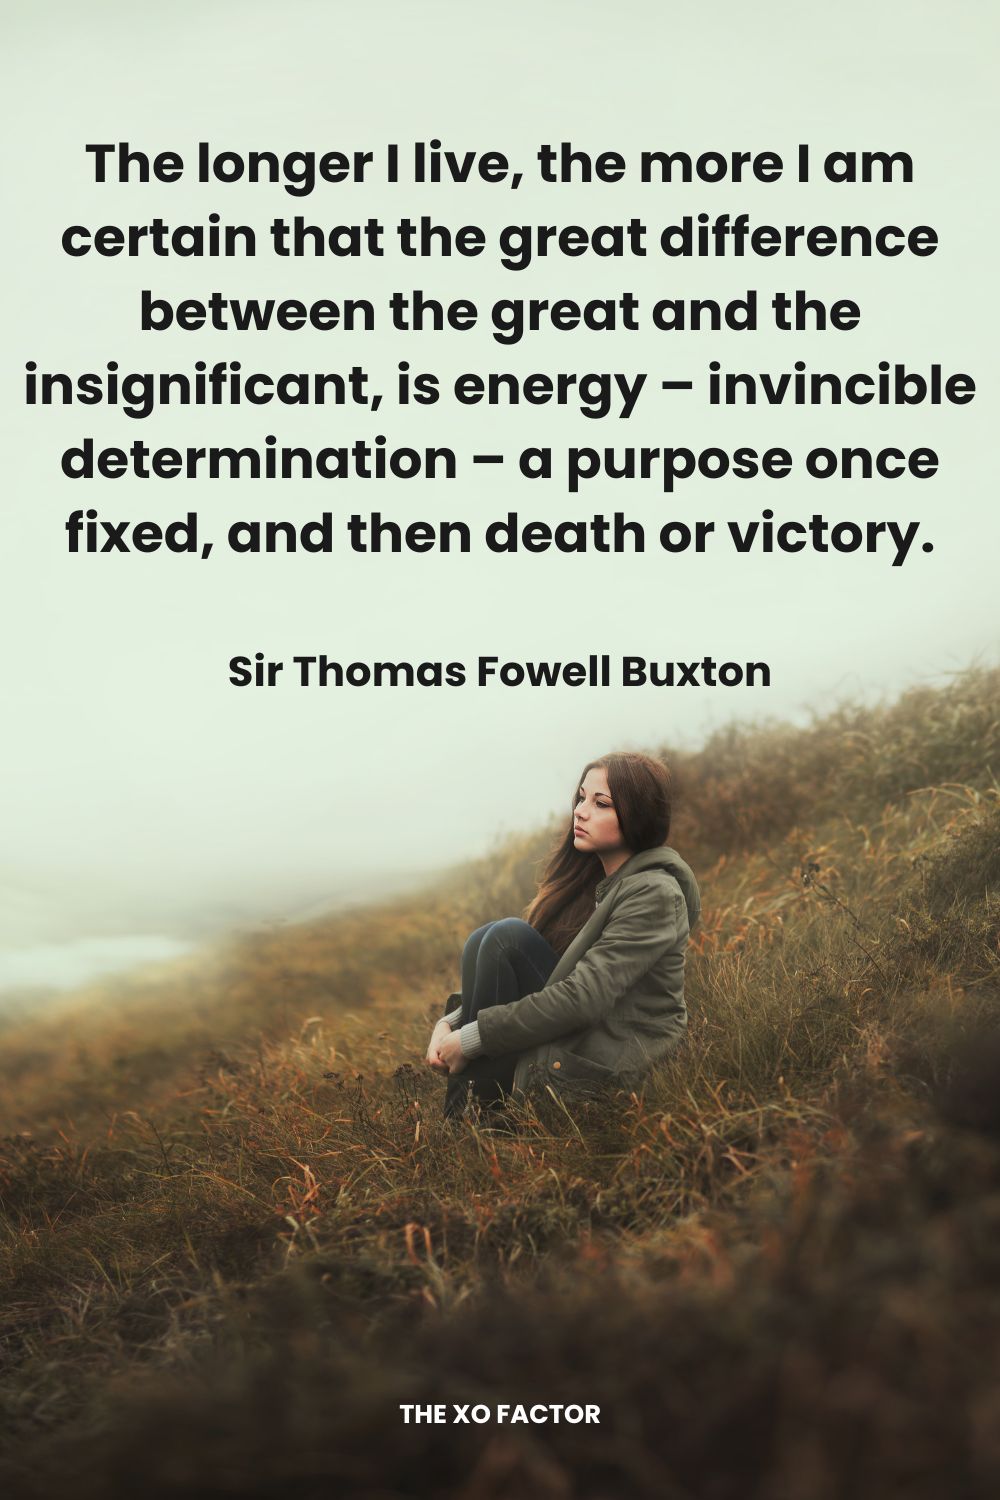 The longer I live, the more I am certain that the great difference between the great and the insignificant, is energy – invincible determination – a purpose once fixed, and then death or victory. Sir Thomas Fowell Buxton